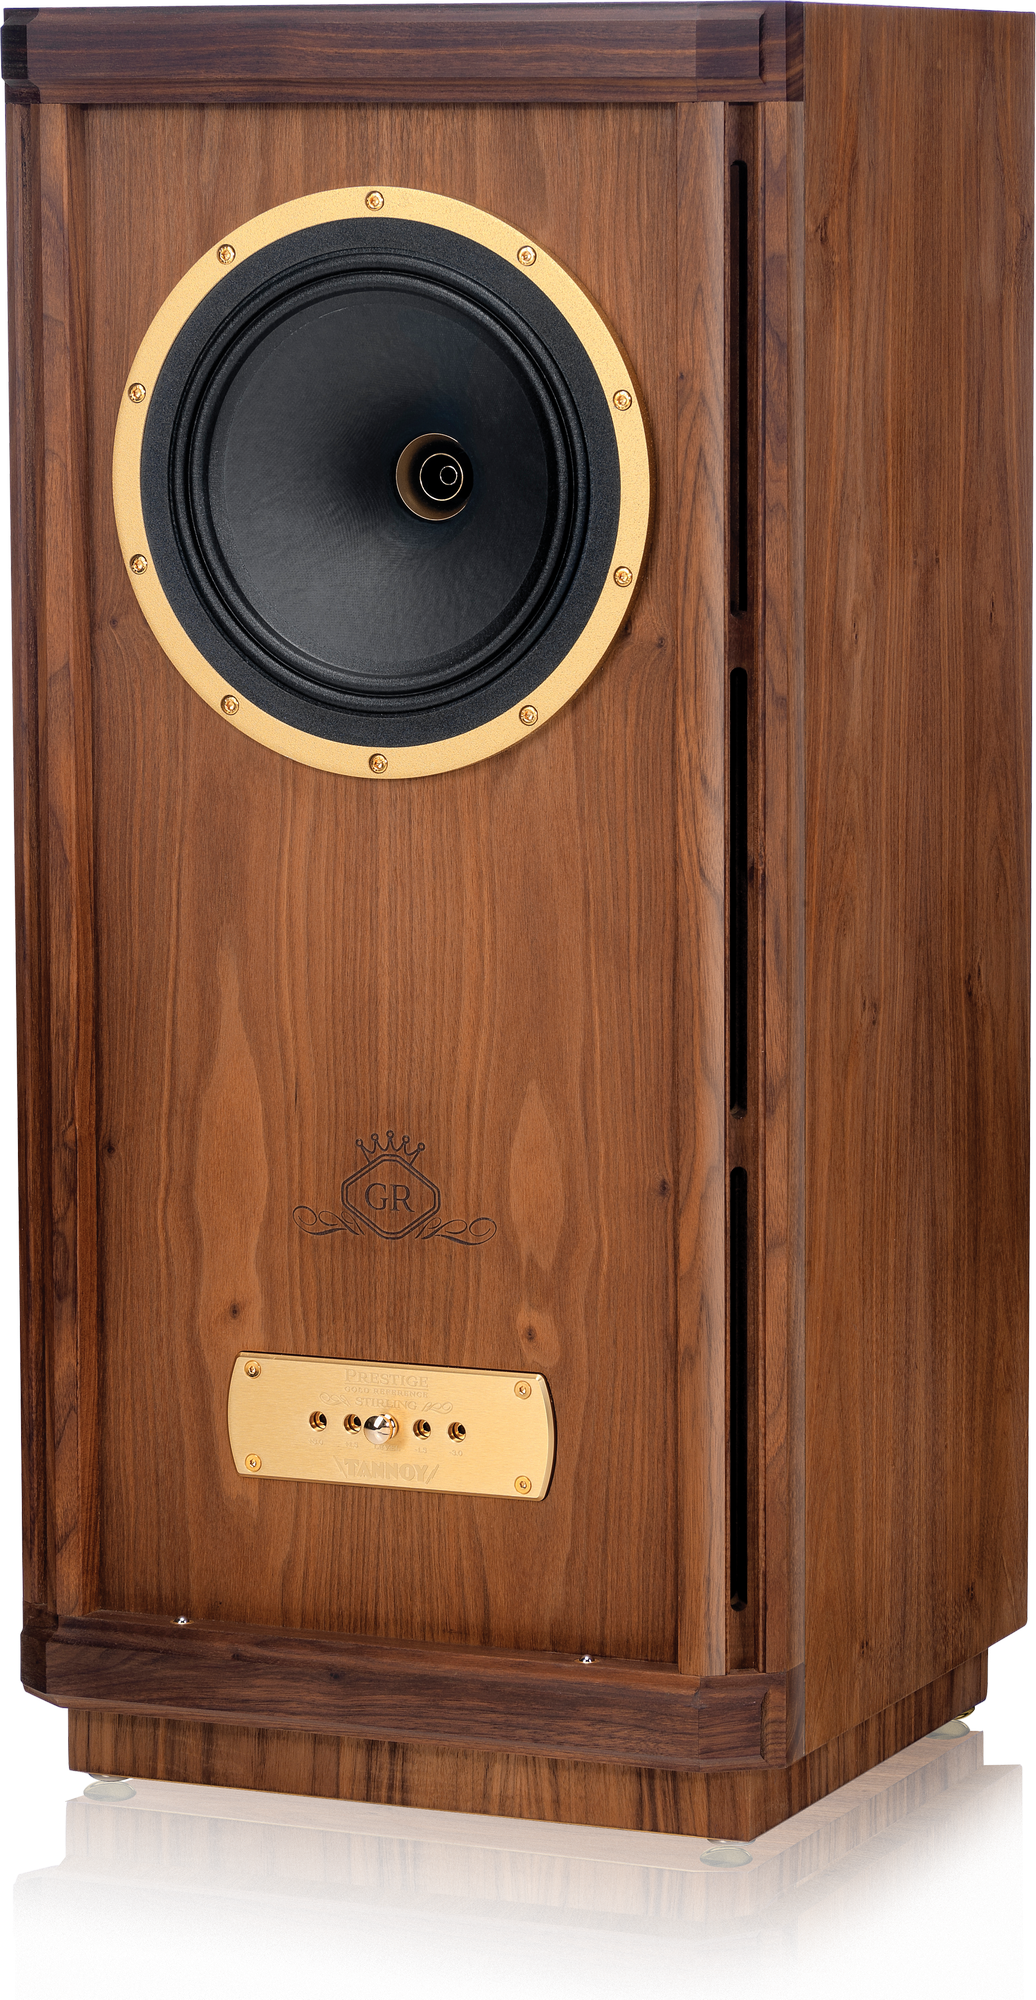 Tannoy Product Stirling Gr Ow